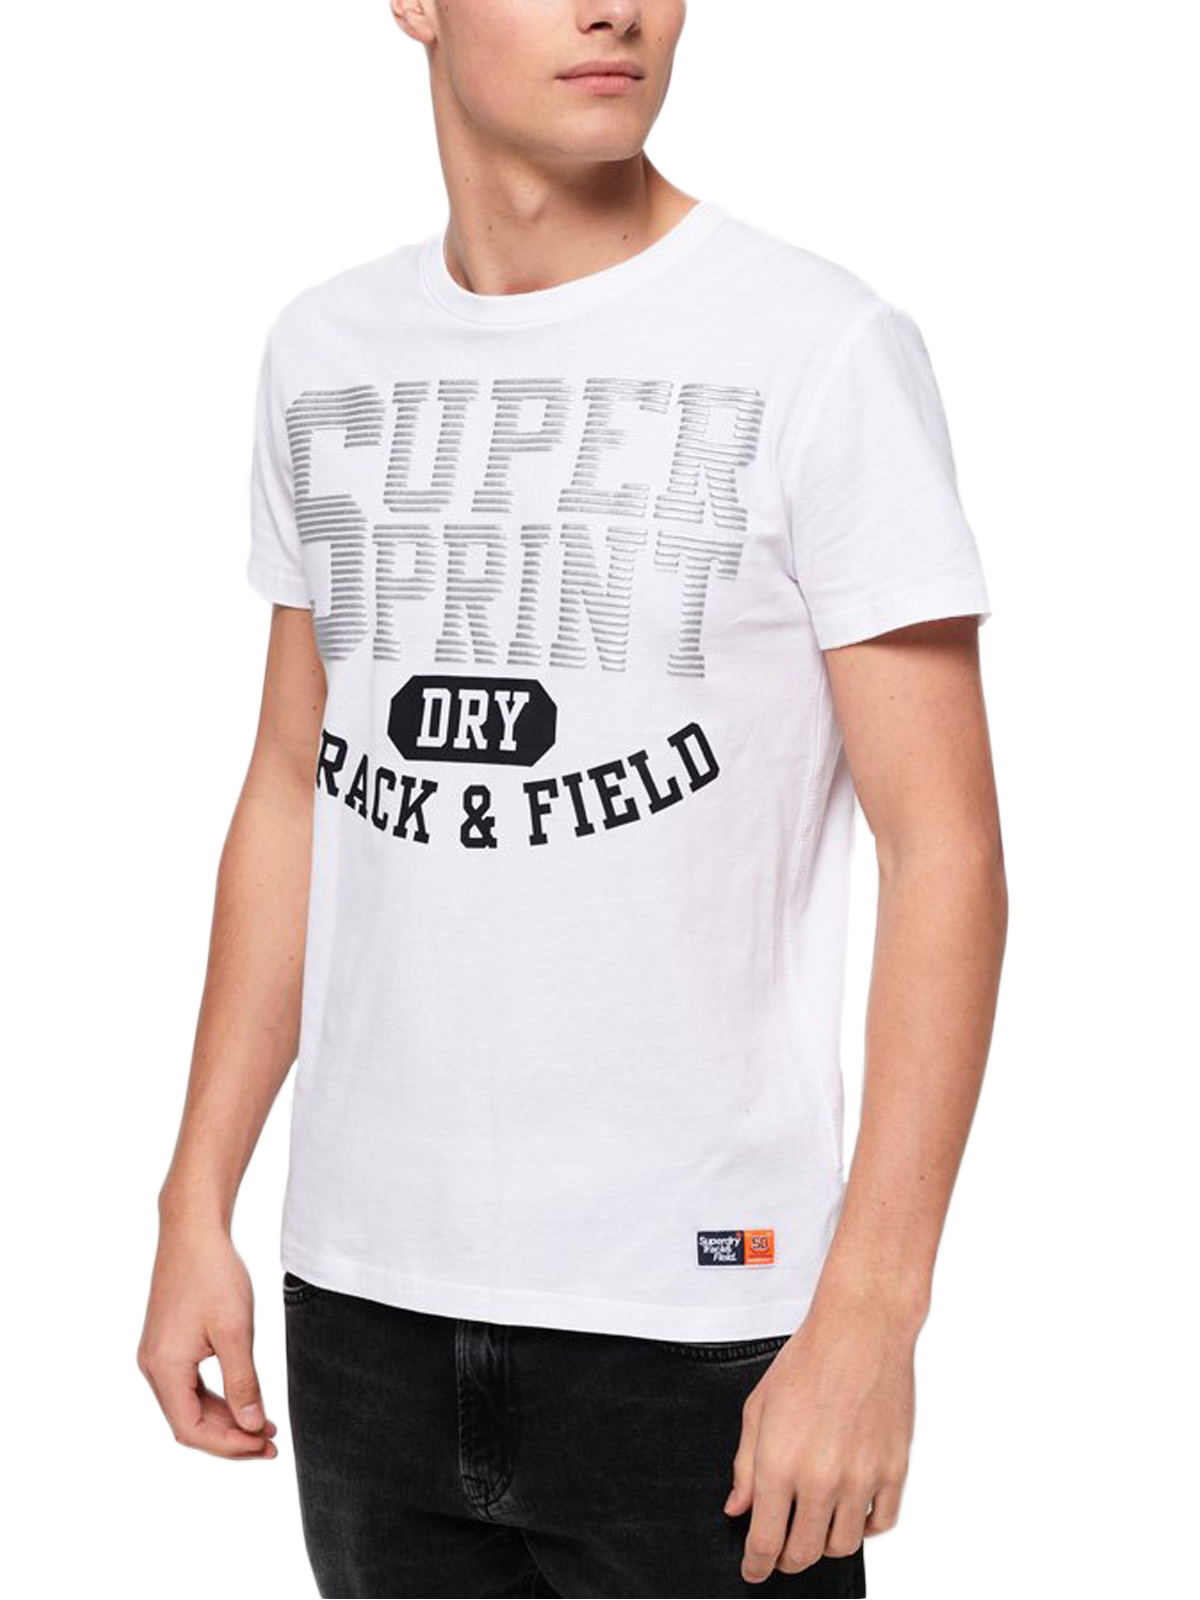   Superdry | Track & Field Lite | Mens T-Shirts